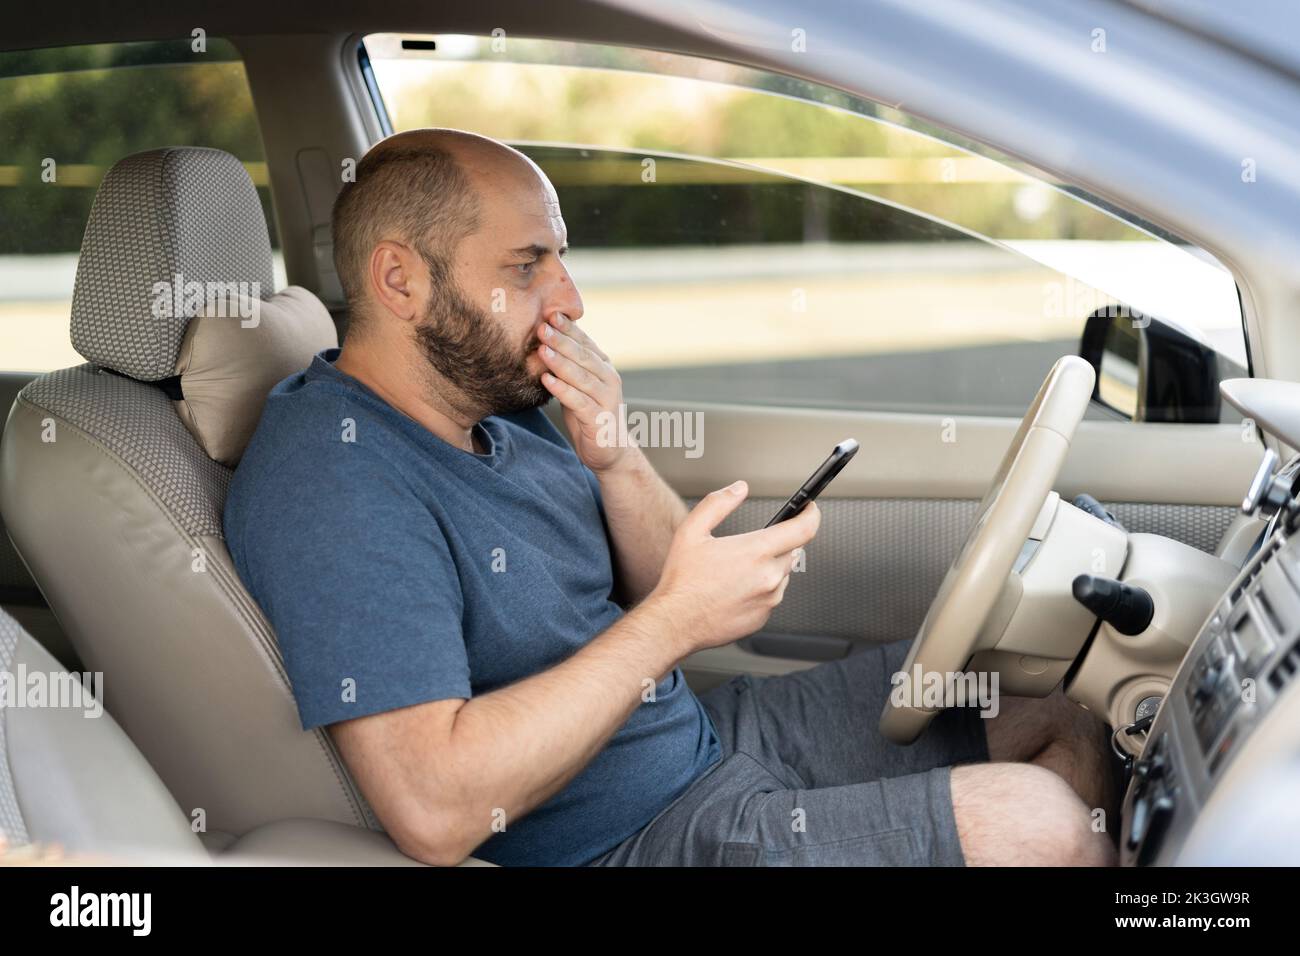 Man sitting inside car with mobile phone in hand texting. Shocked man checking his smartphone not paying attention at road stunned by bad text message Stock Photo